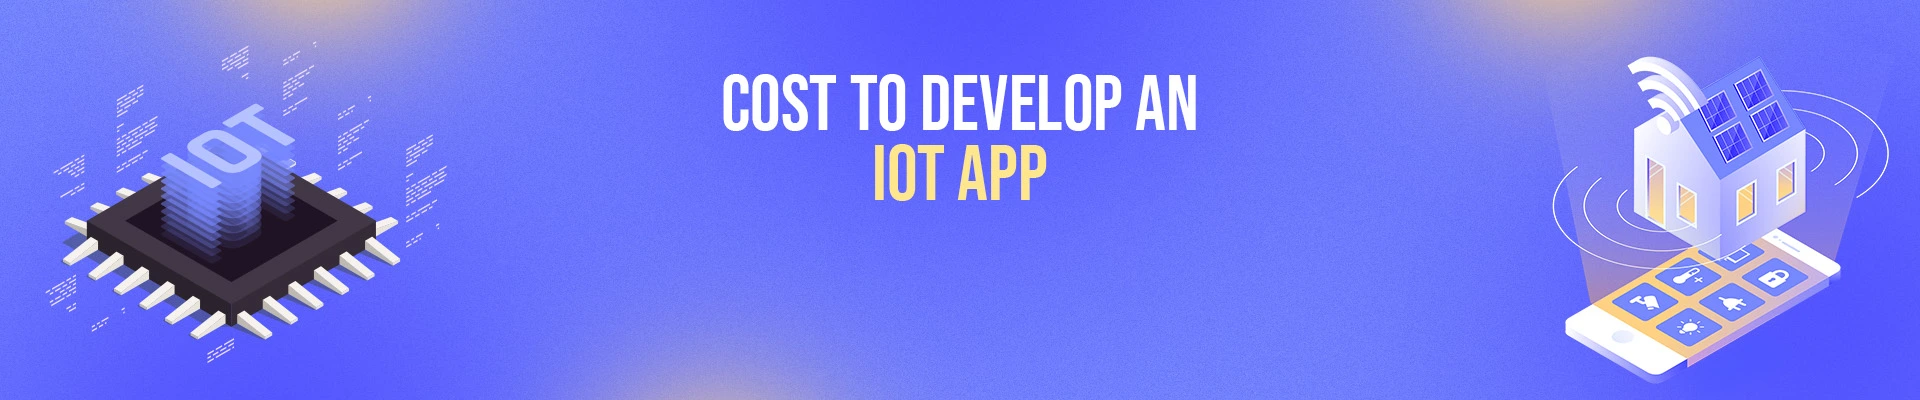 Cost to Develop an IoT App